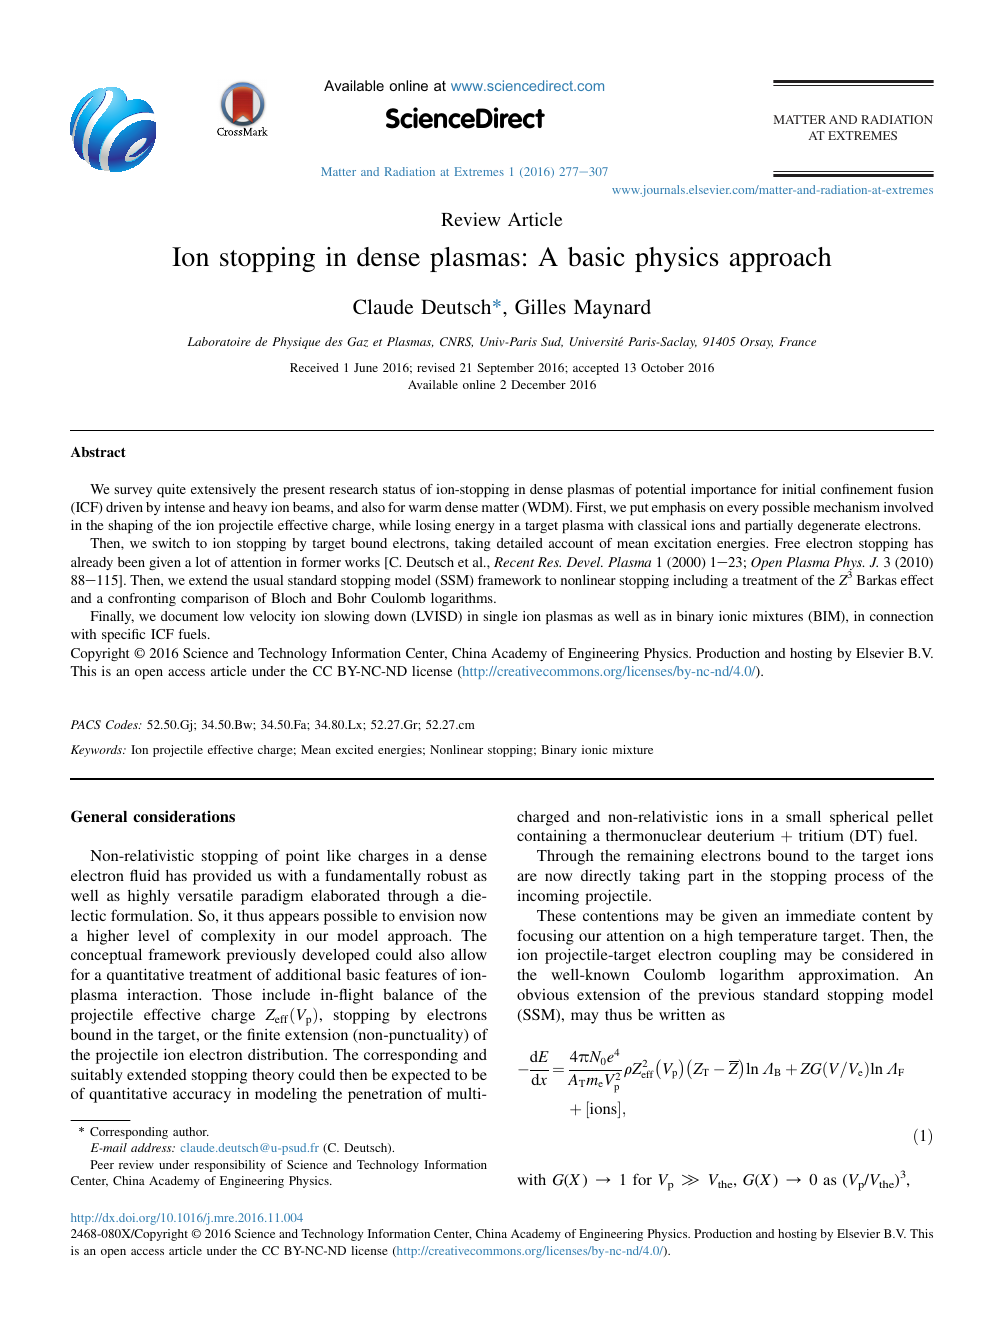 Ion Stopping In Dense Plasmas A Basic Physics Approach Topic Of Research Paper In Physical Sciences Download Scholarly Article Pdf And Read For Free On Cyberleninka Open Science Hub